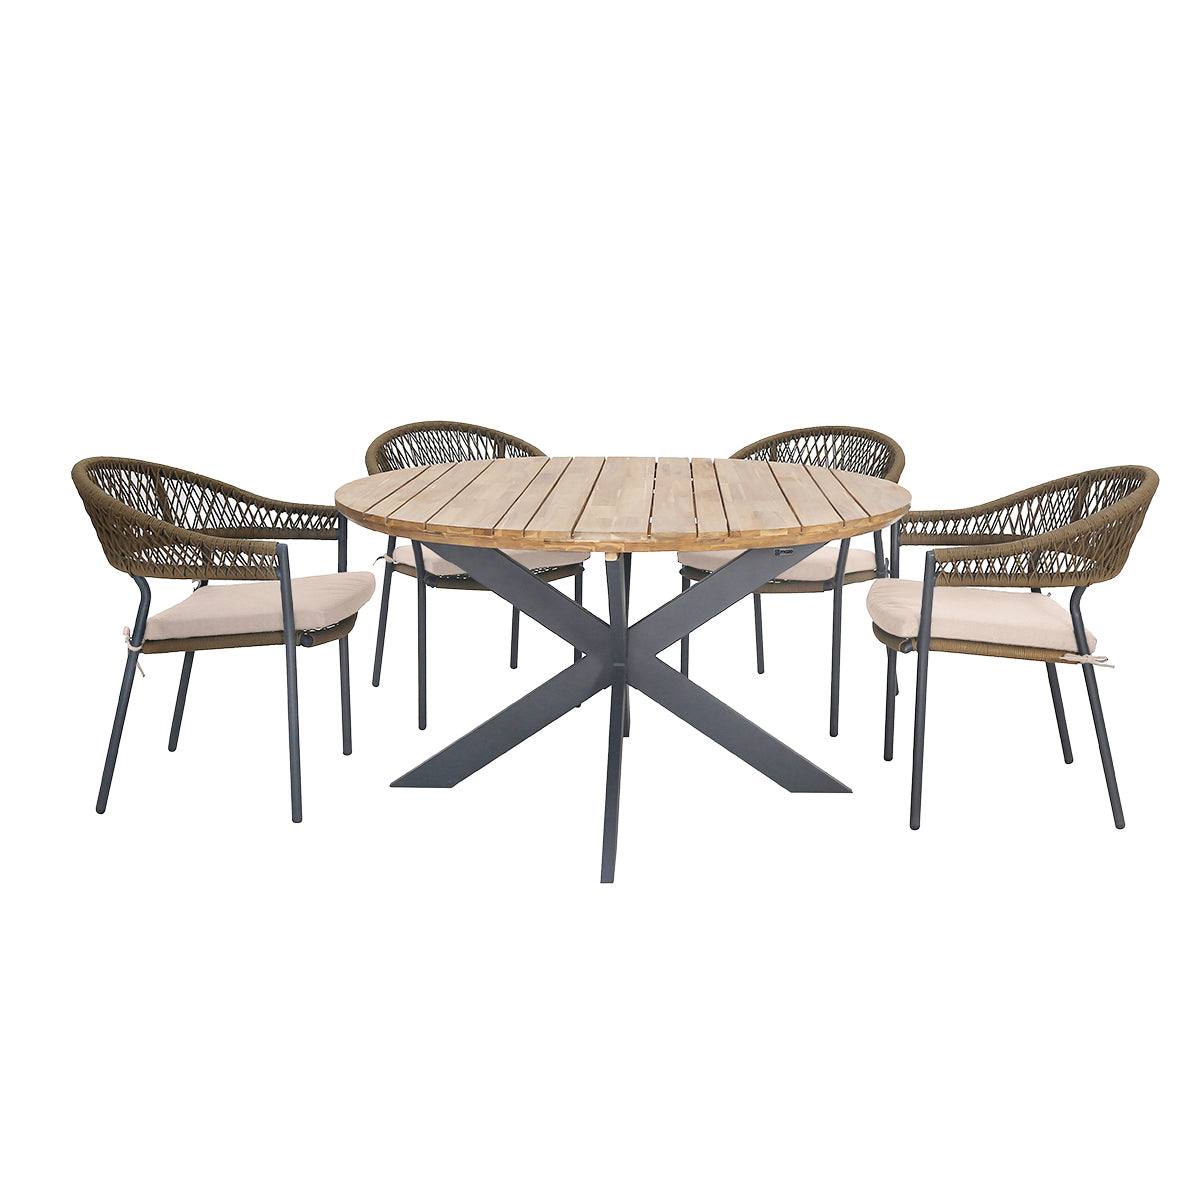 Maze Outdoor Bali Rope Weave Round Dining Set In Beige 6 Seater